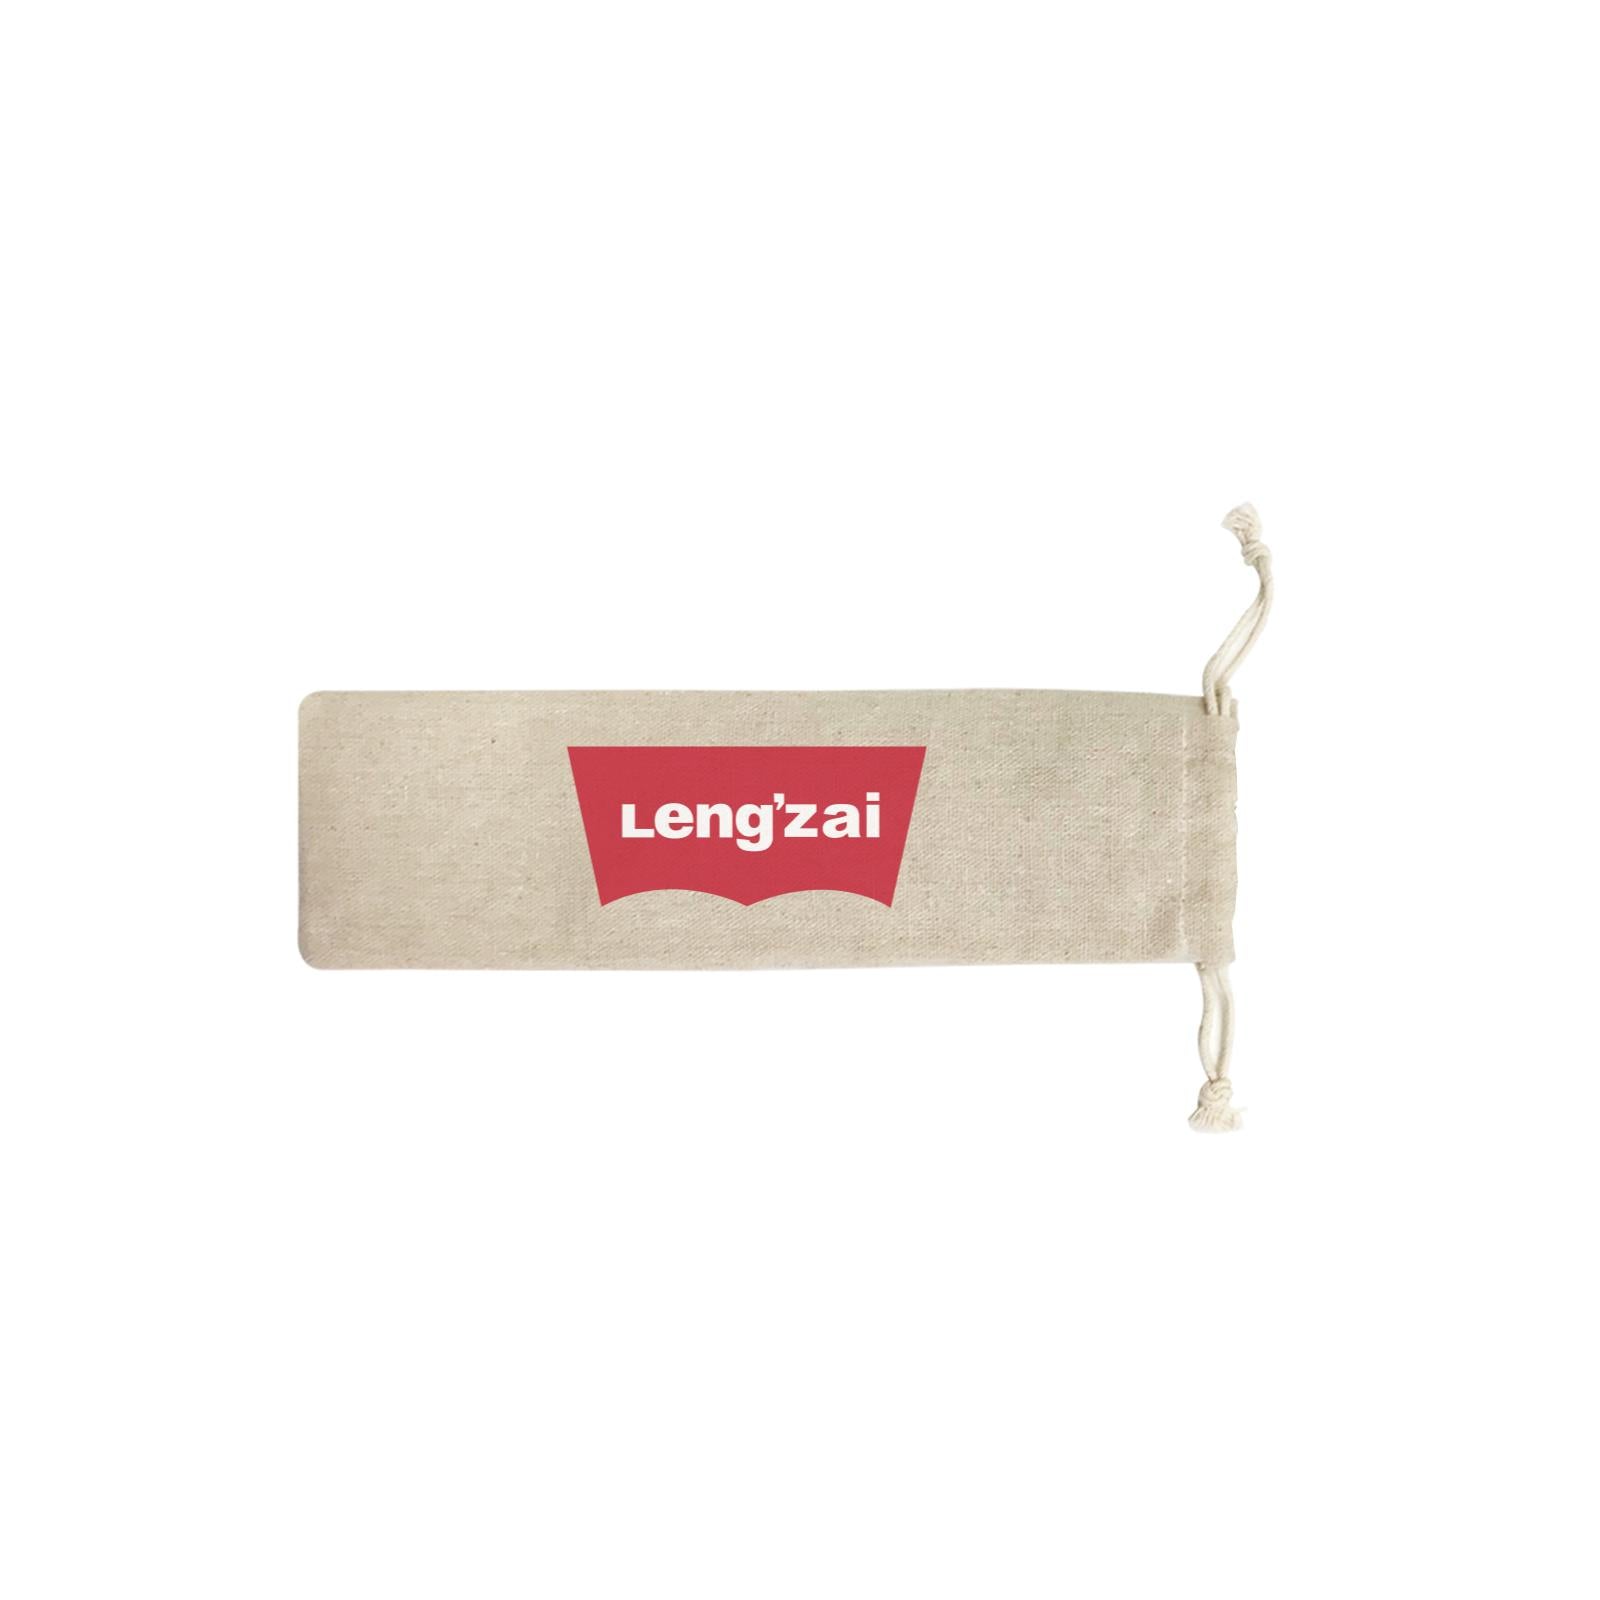 Slang Statement Lengzai SB Straw Pouch (No Straws included)